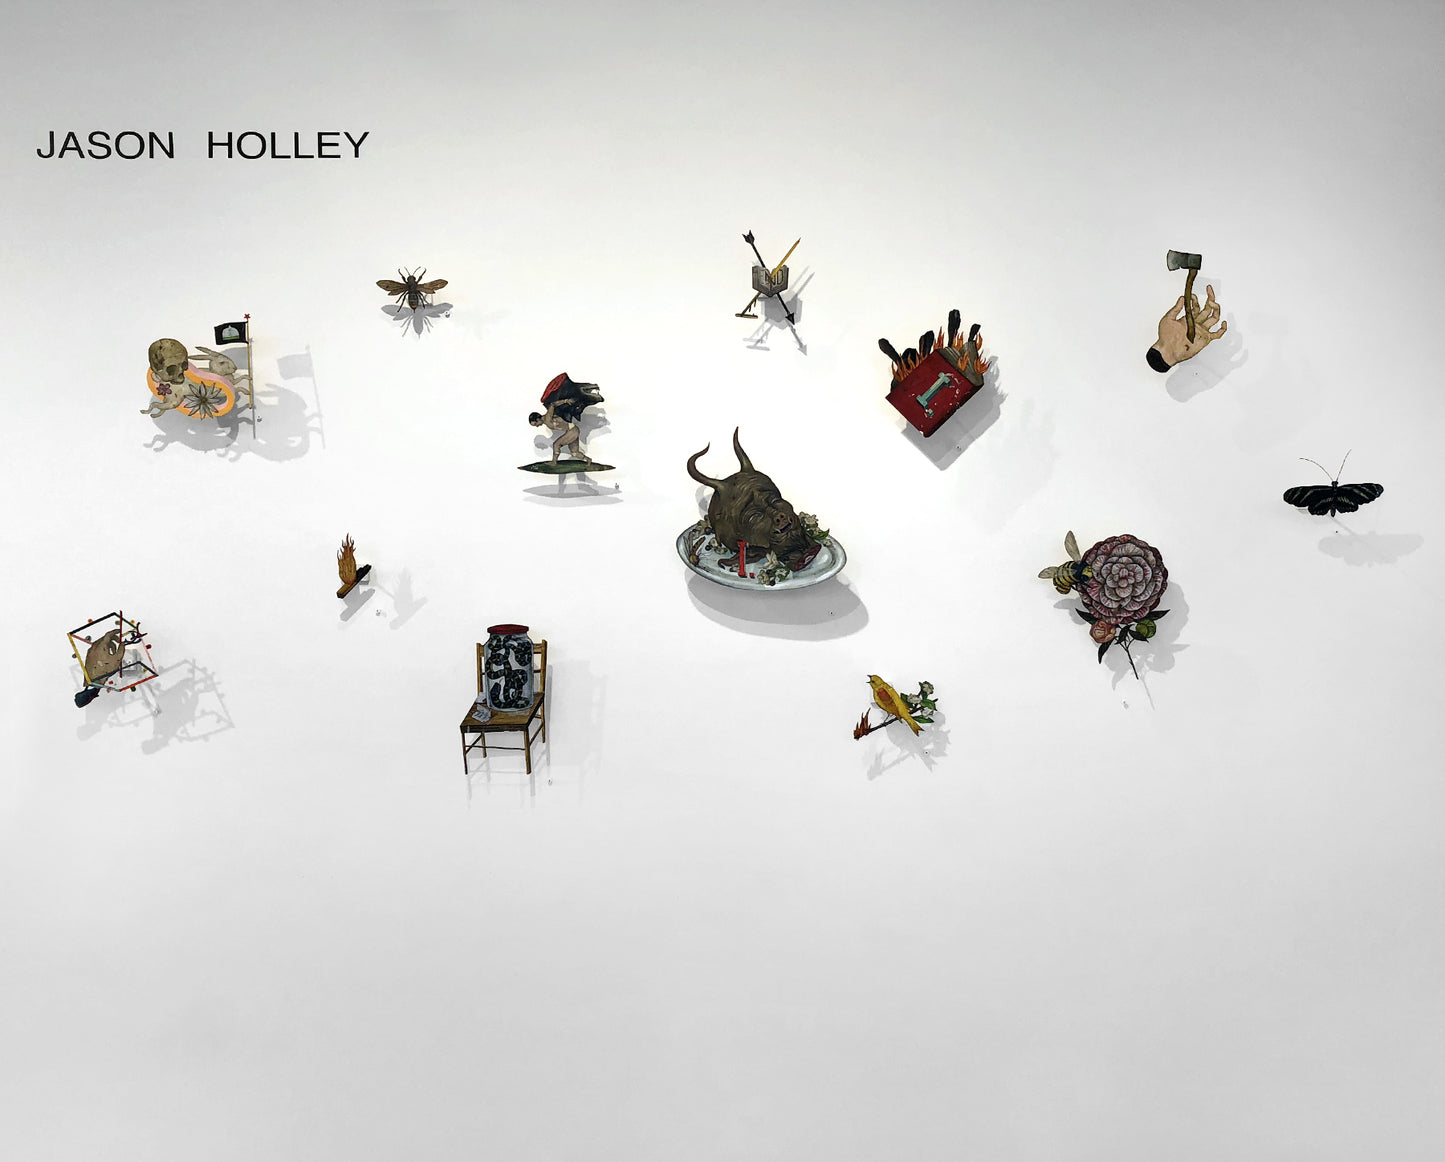 Jason Holley - Get On With It